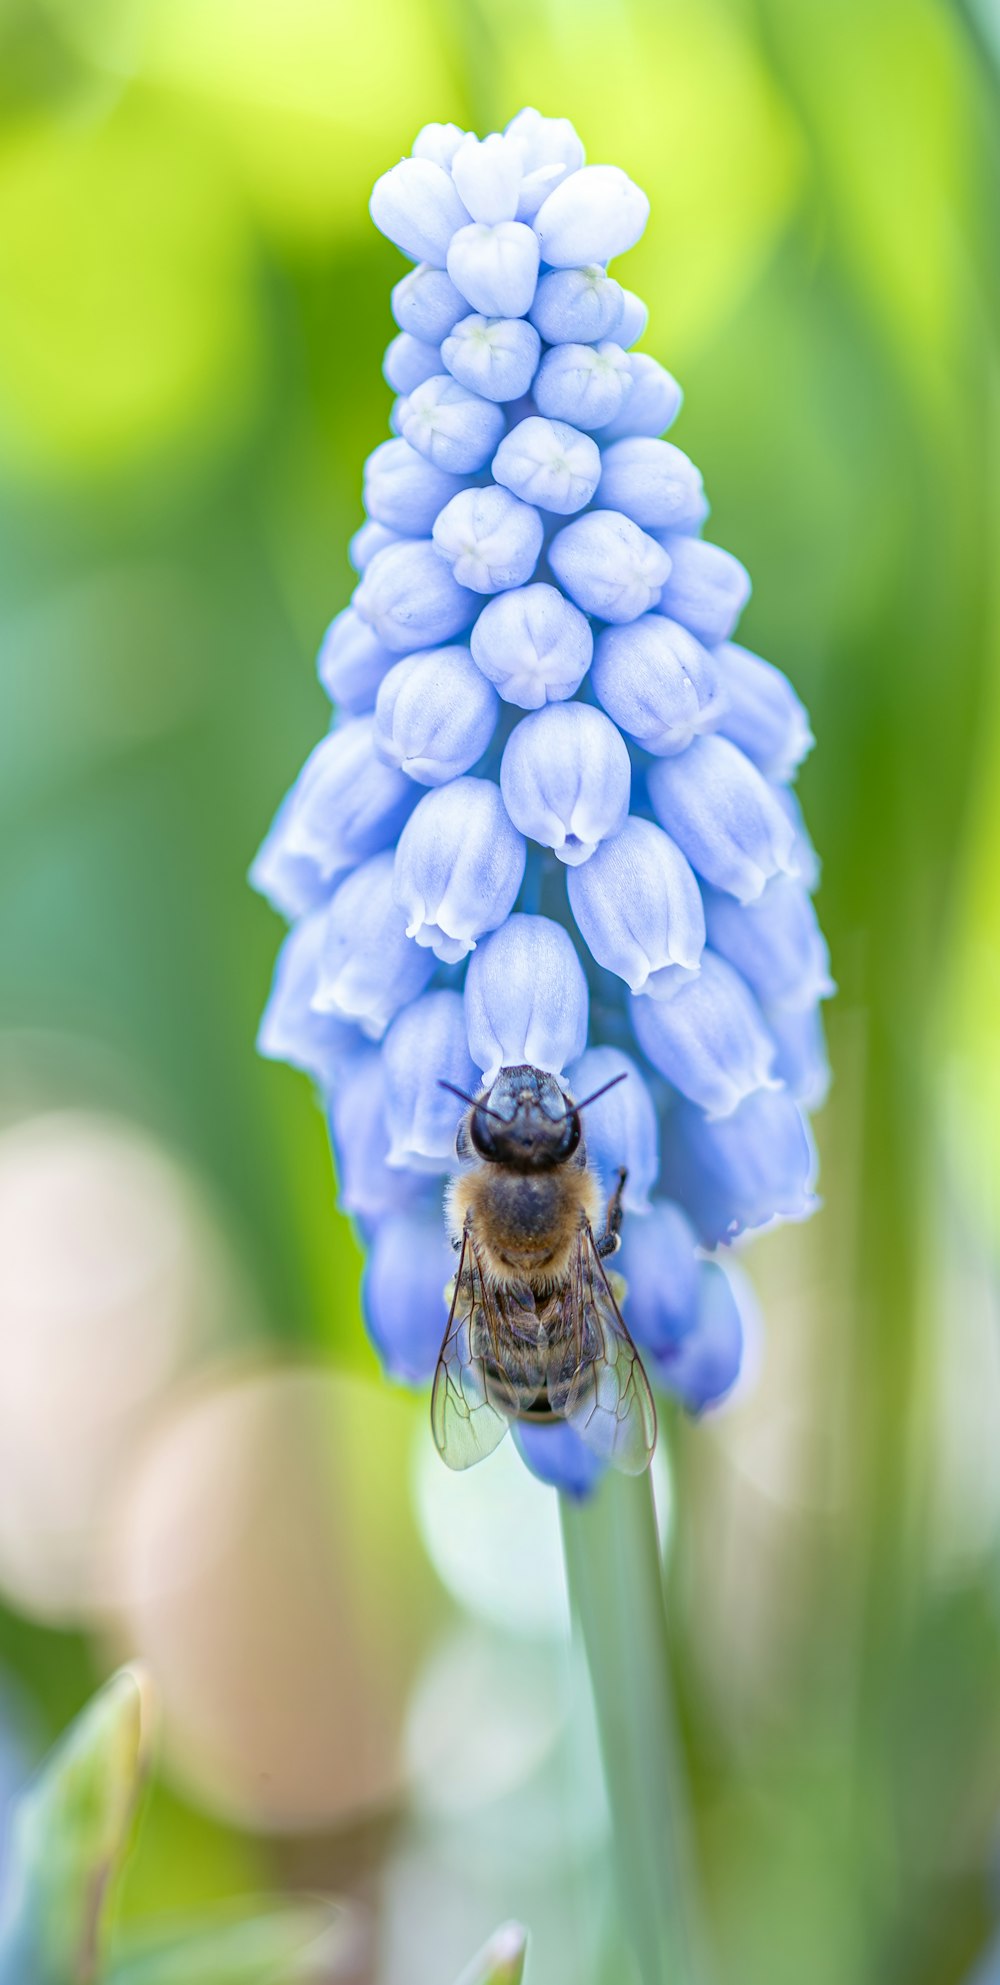 a close up of a blue flower with a bee on it